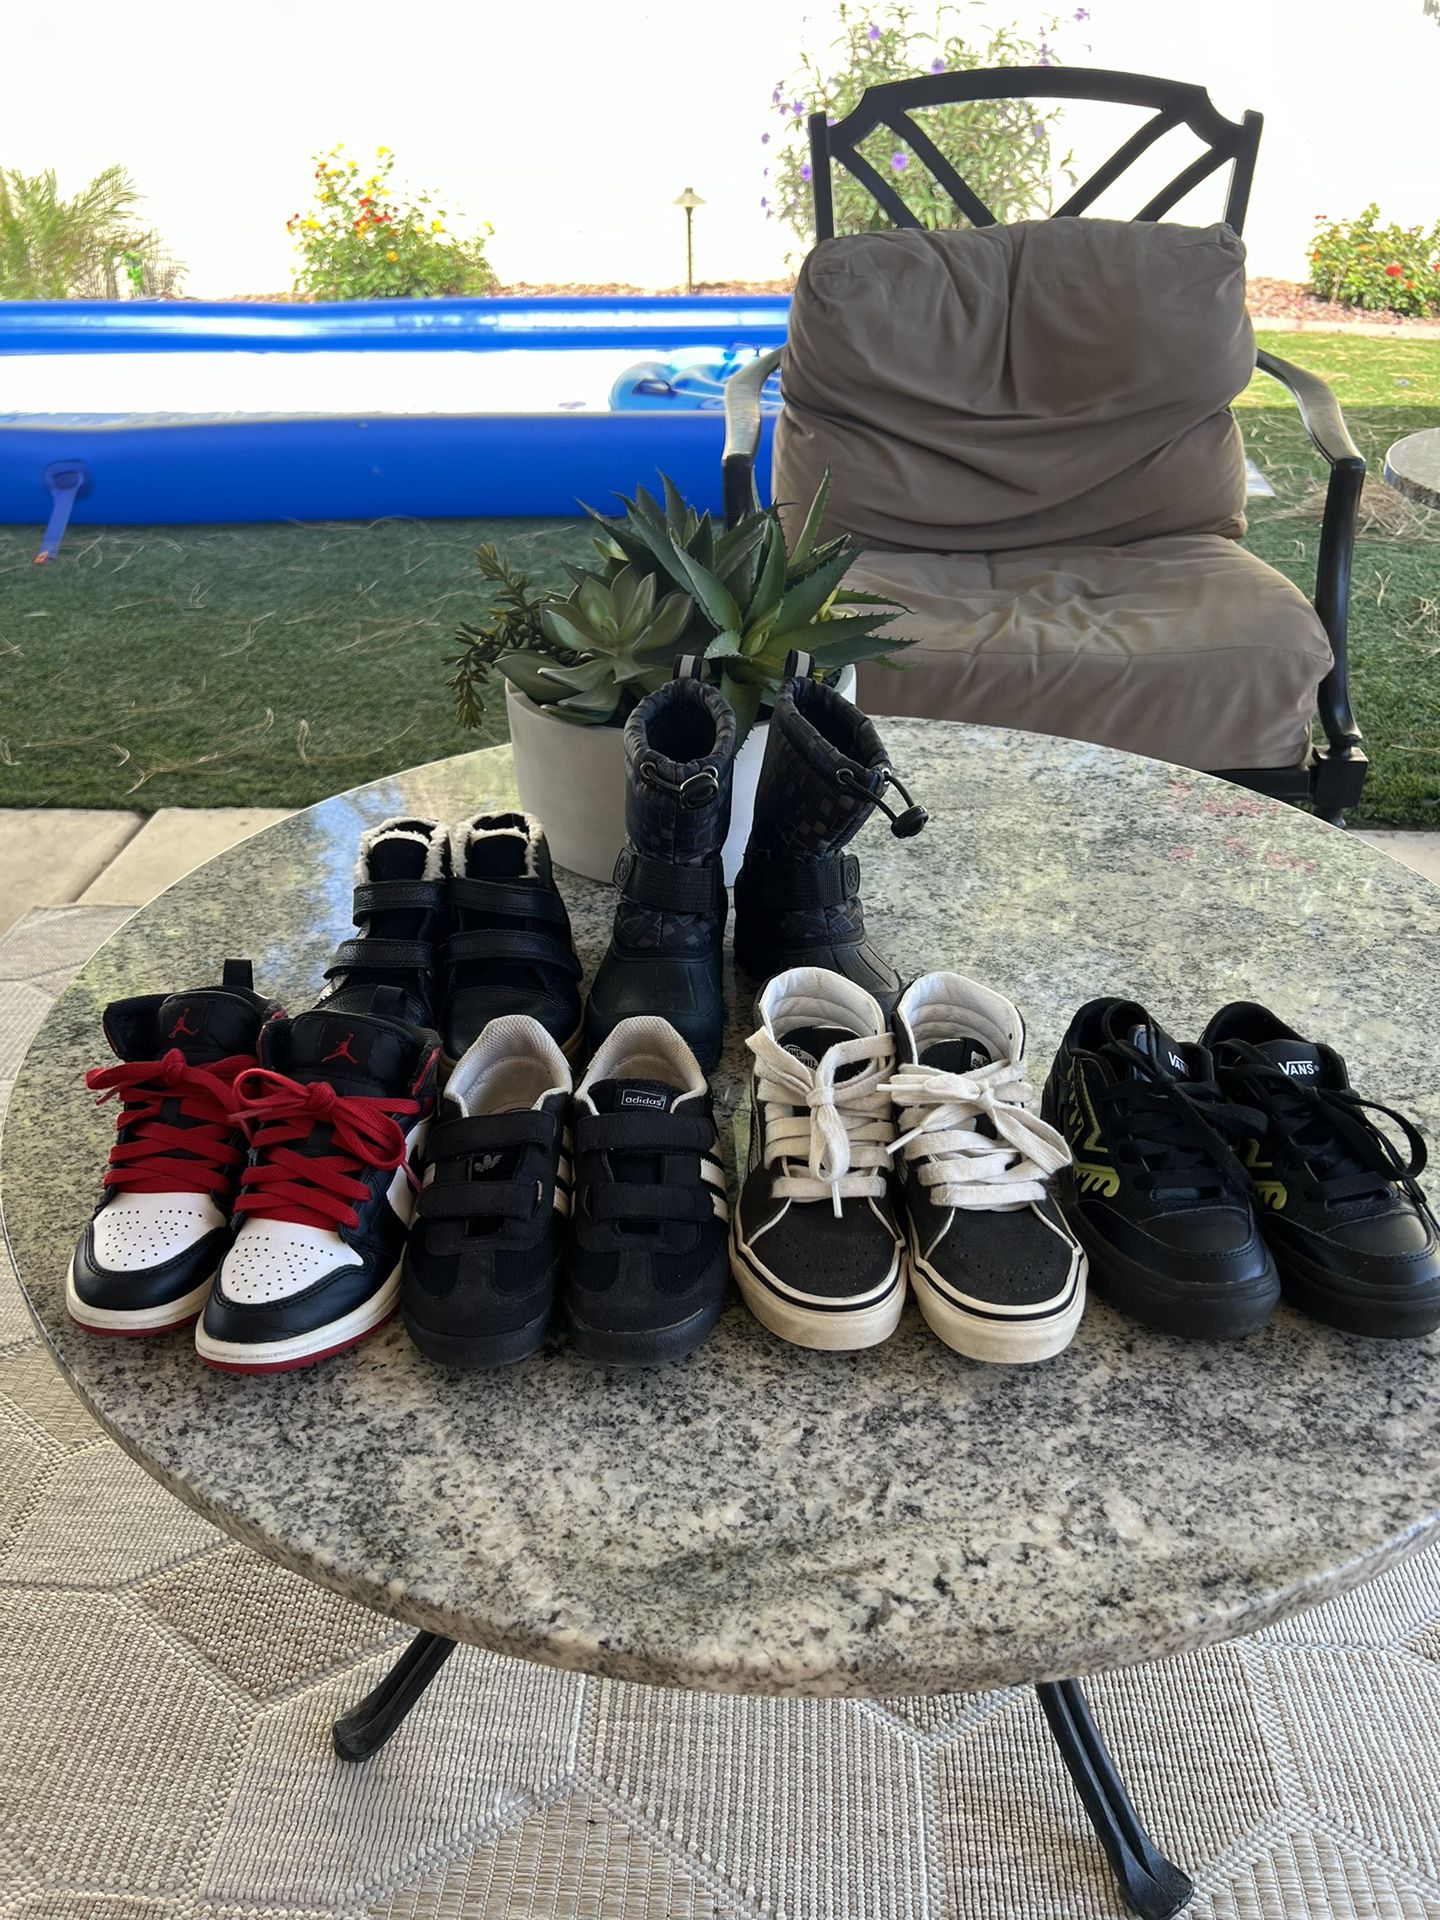 Toddler Shoes Lot